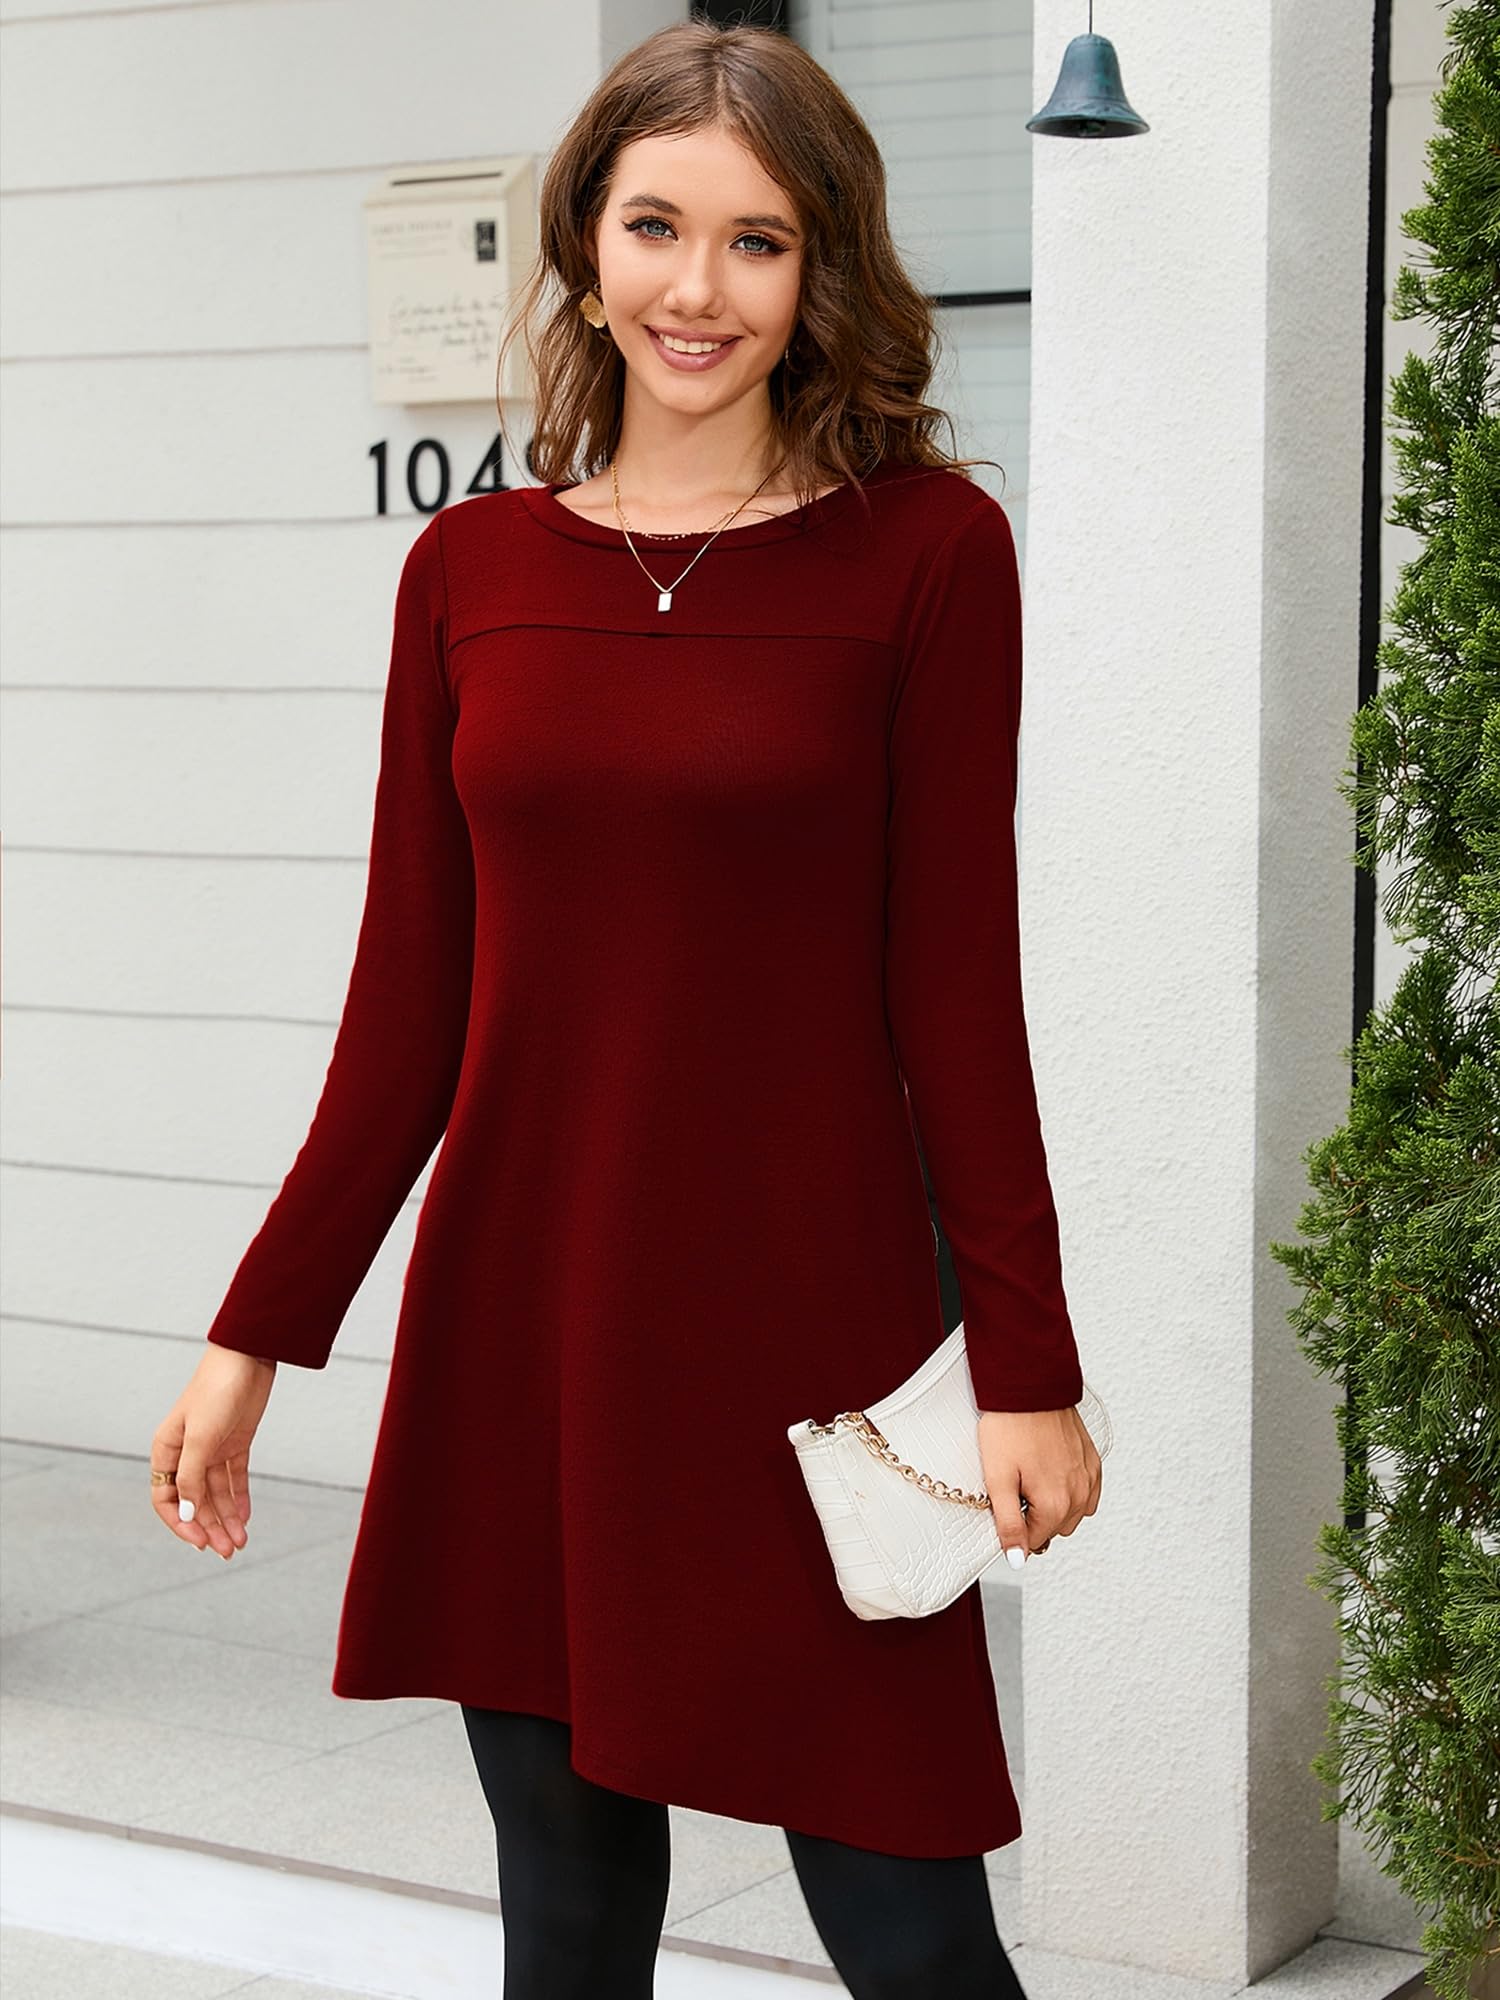 KORSIS Dresses for Women Long Sleeve Round Neck Casual Button Side T Shirts Loose Fitting Sweater Tunic Dress